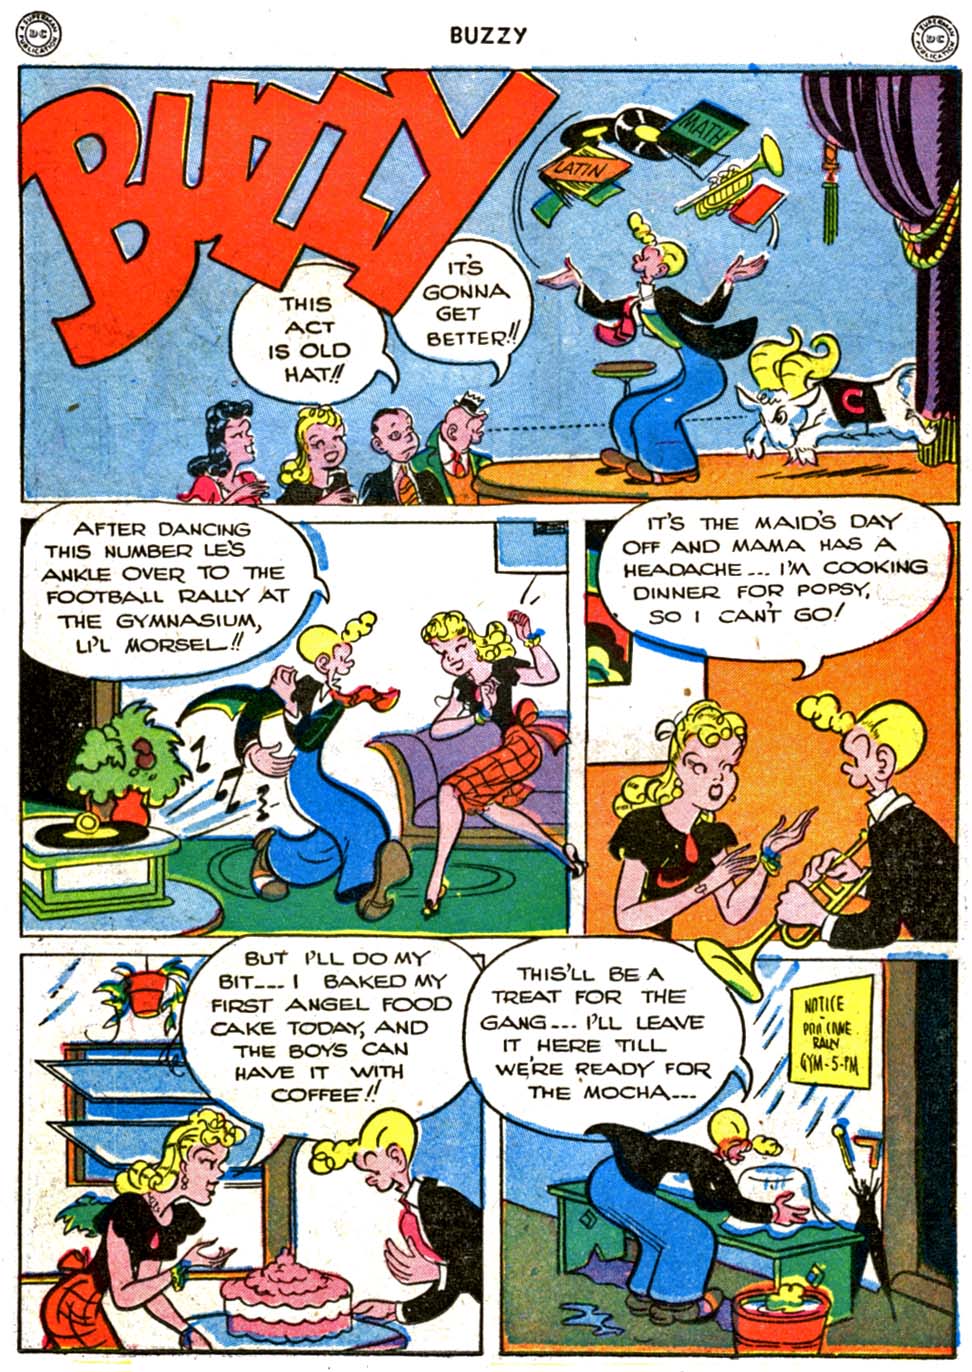 Read online Buzzy comic -  Issue #13 - 15